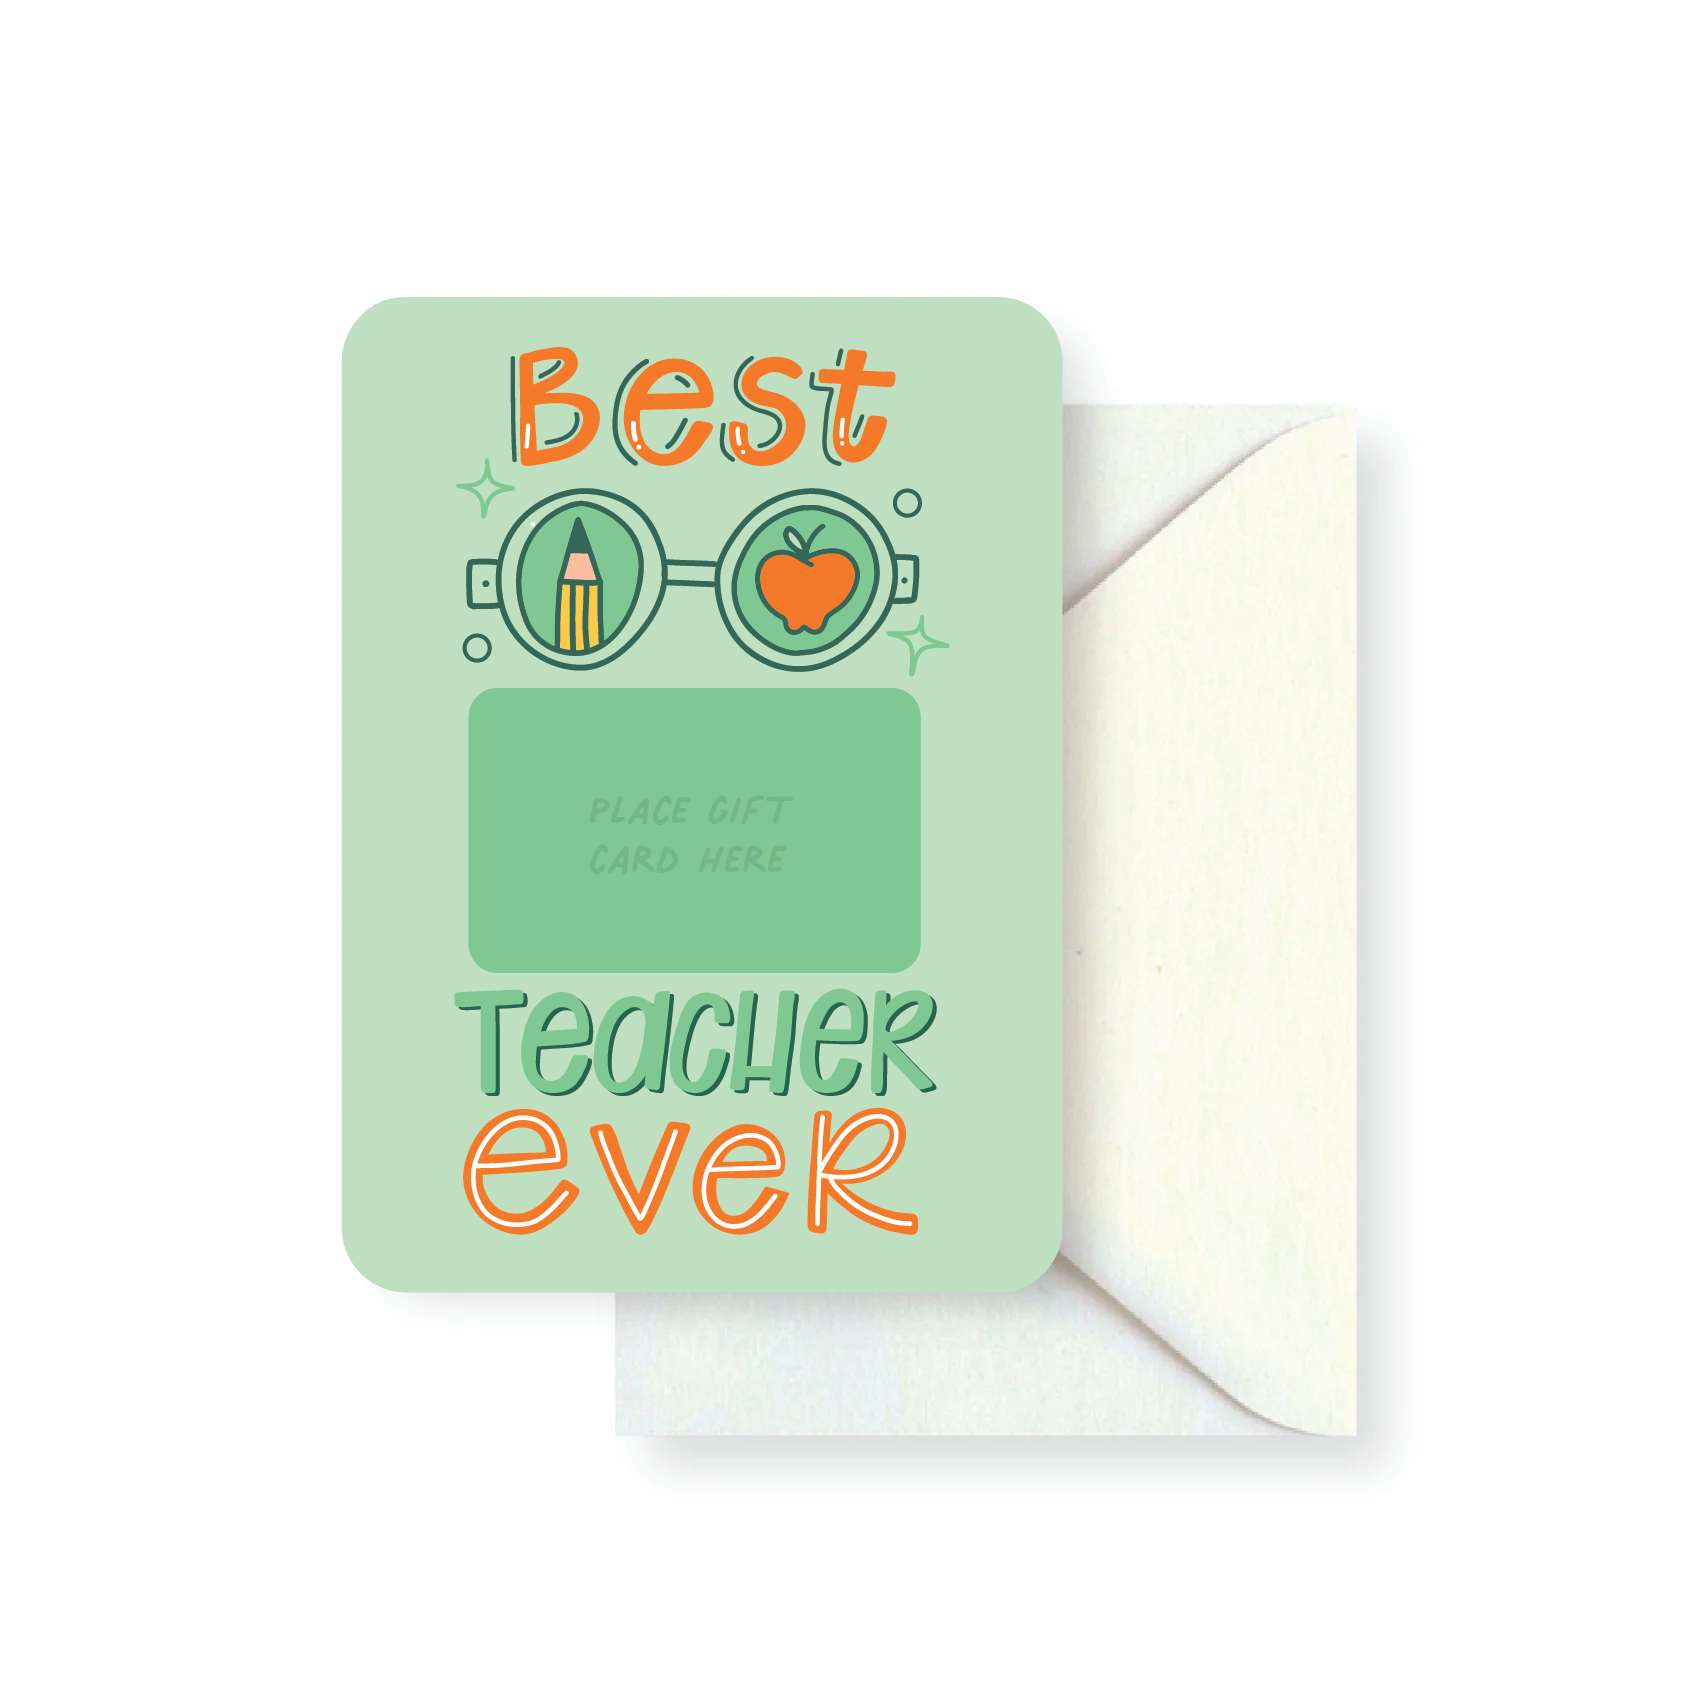 Best Teacher Gifts According To Teachers This Holiday | Hip2Save